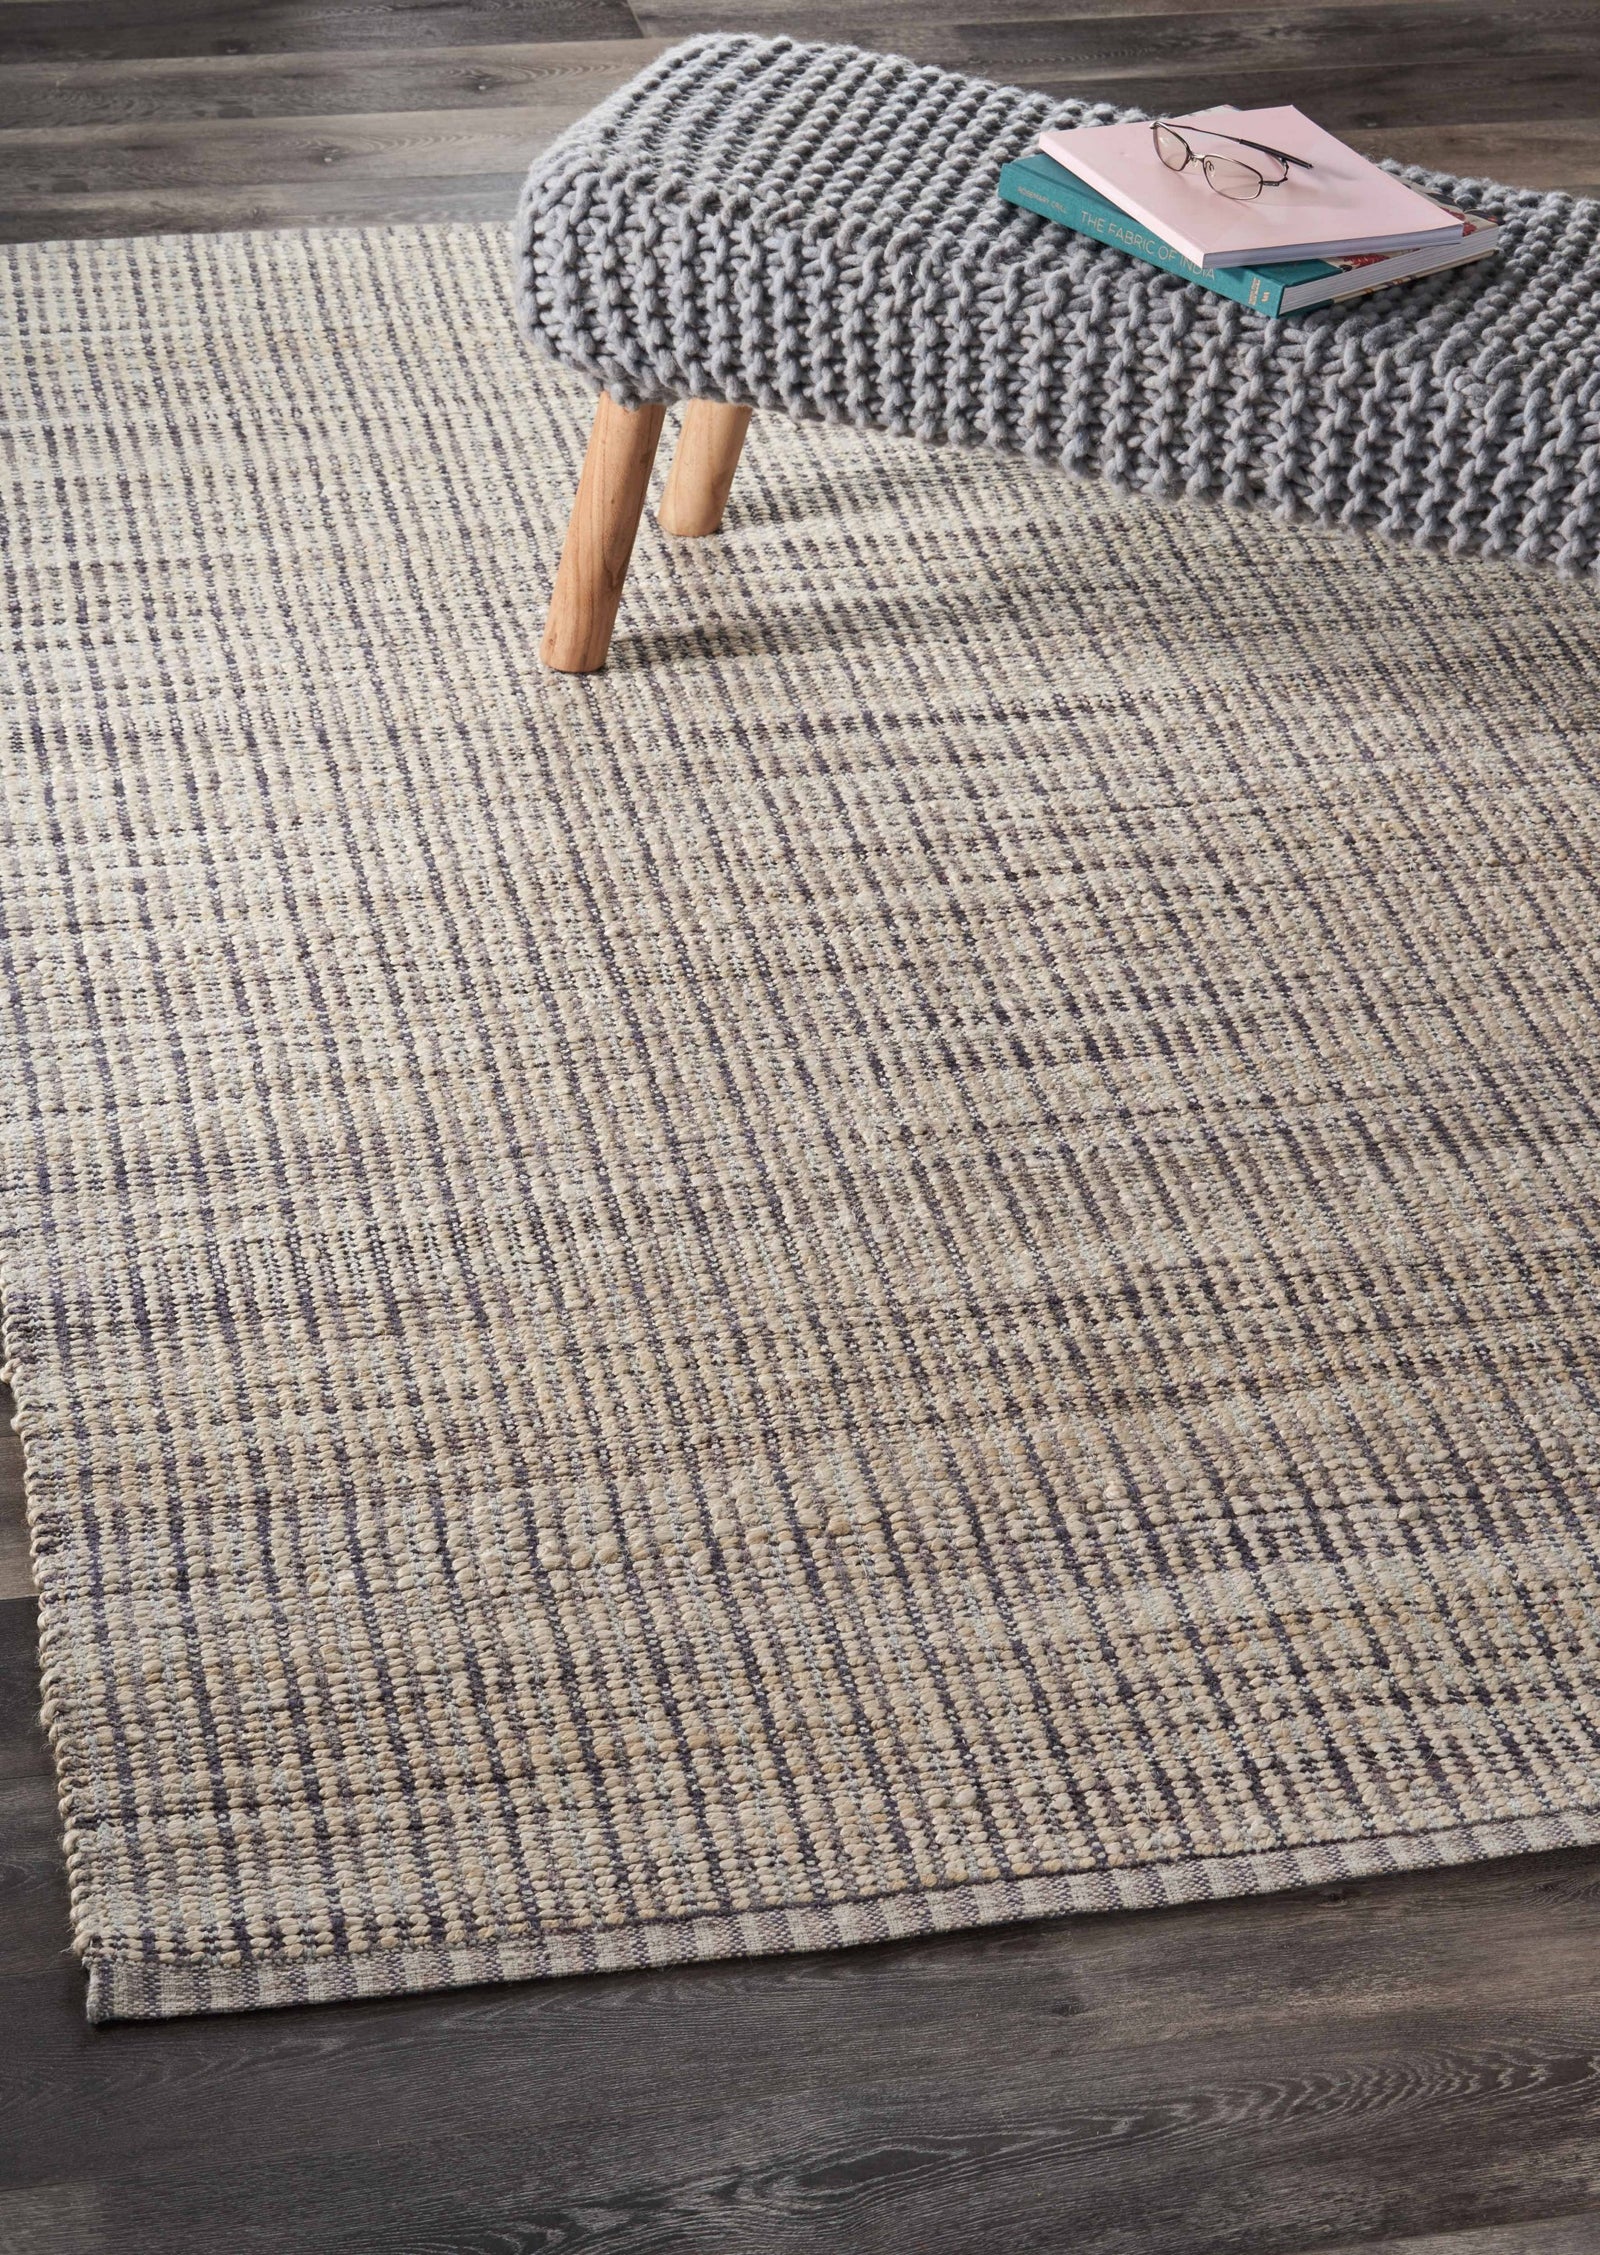 5’ x 8’ Brown and Beige Toned Jute Area Rug